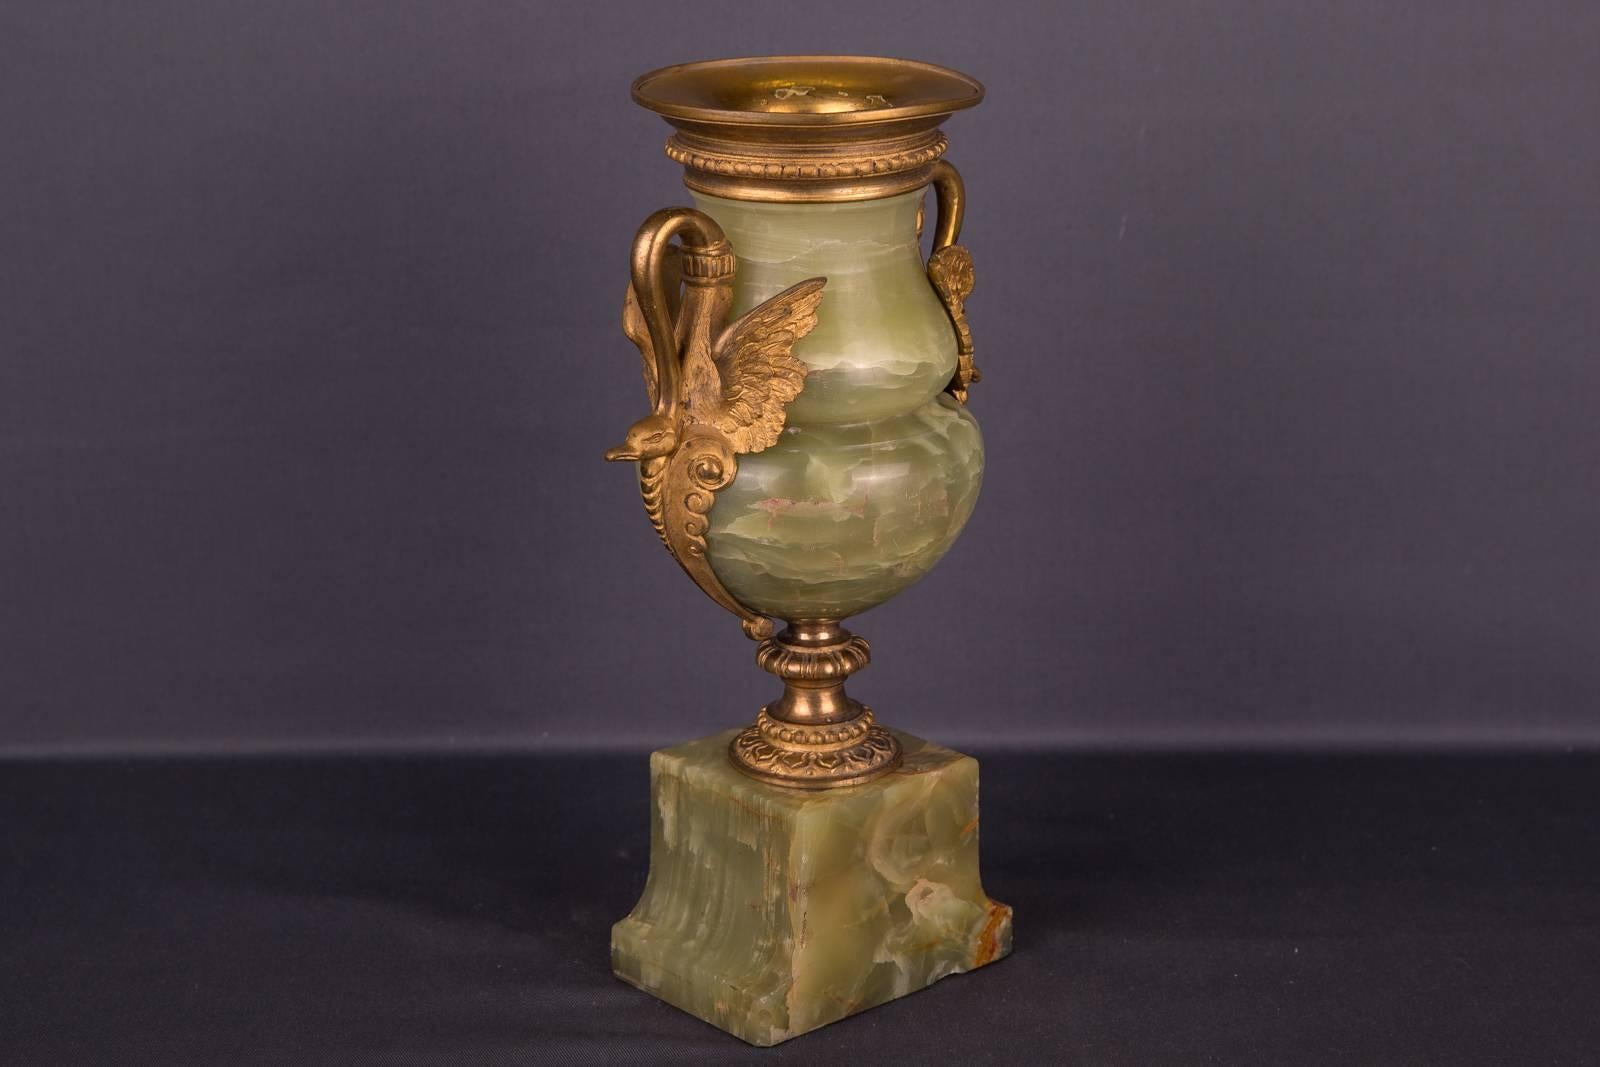 Extremely rare vase of onyx marble with fire-gilt bronze applications, circa 1870
Handle two Classic Empire swans handle which pulls to the ground sting. Multi-stepped and profiled bronze stole. The bulbous vase shape as well as pedestals are green